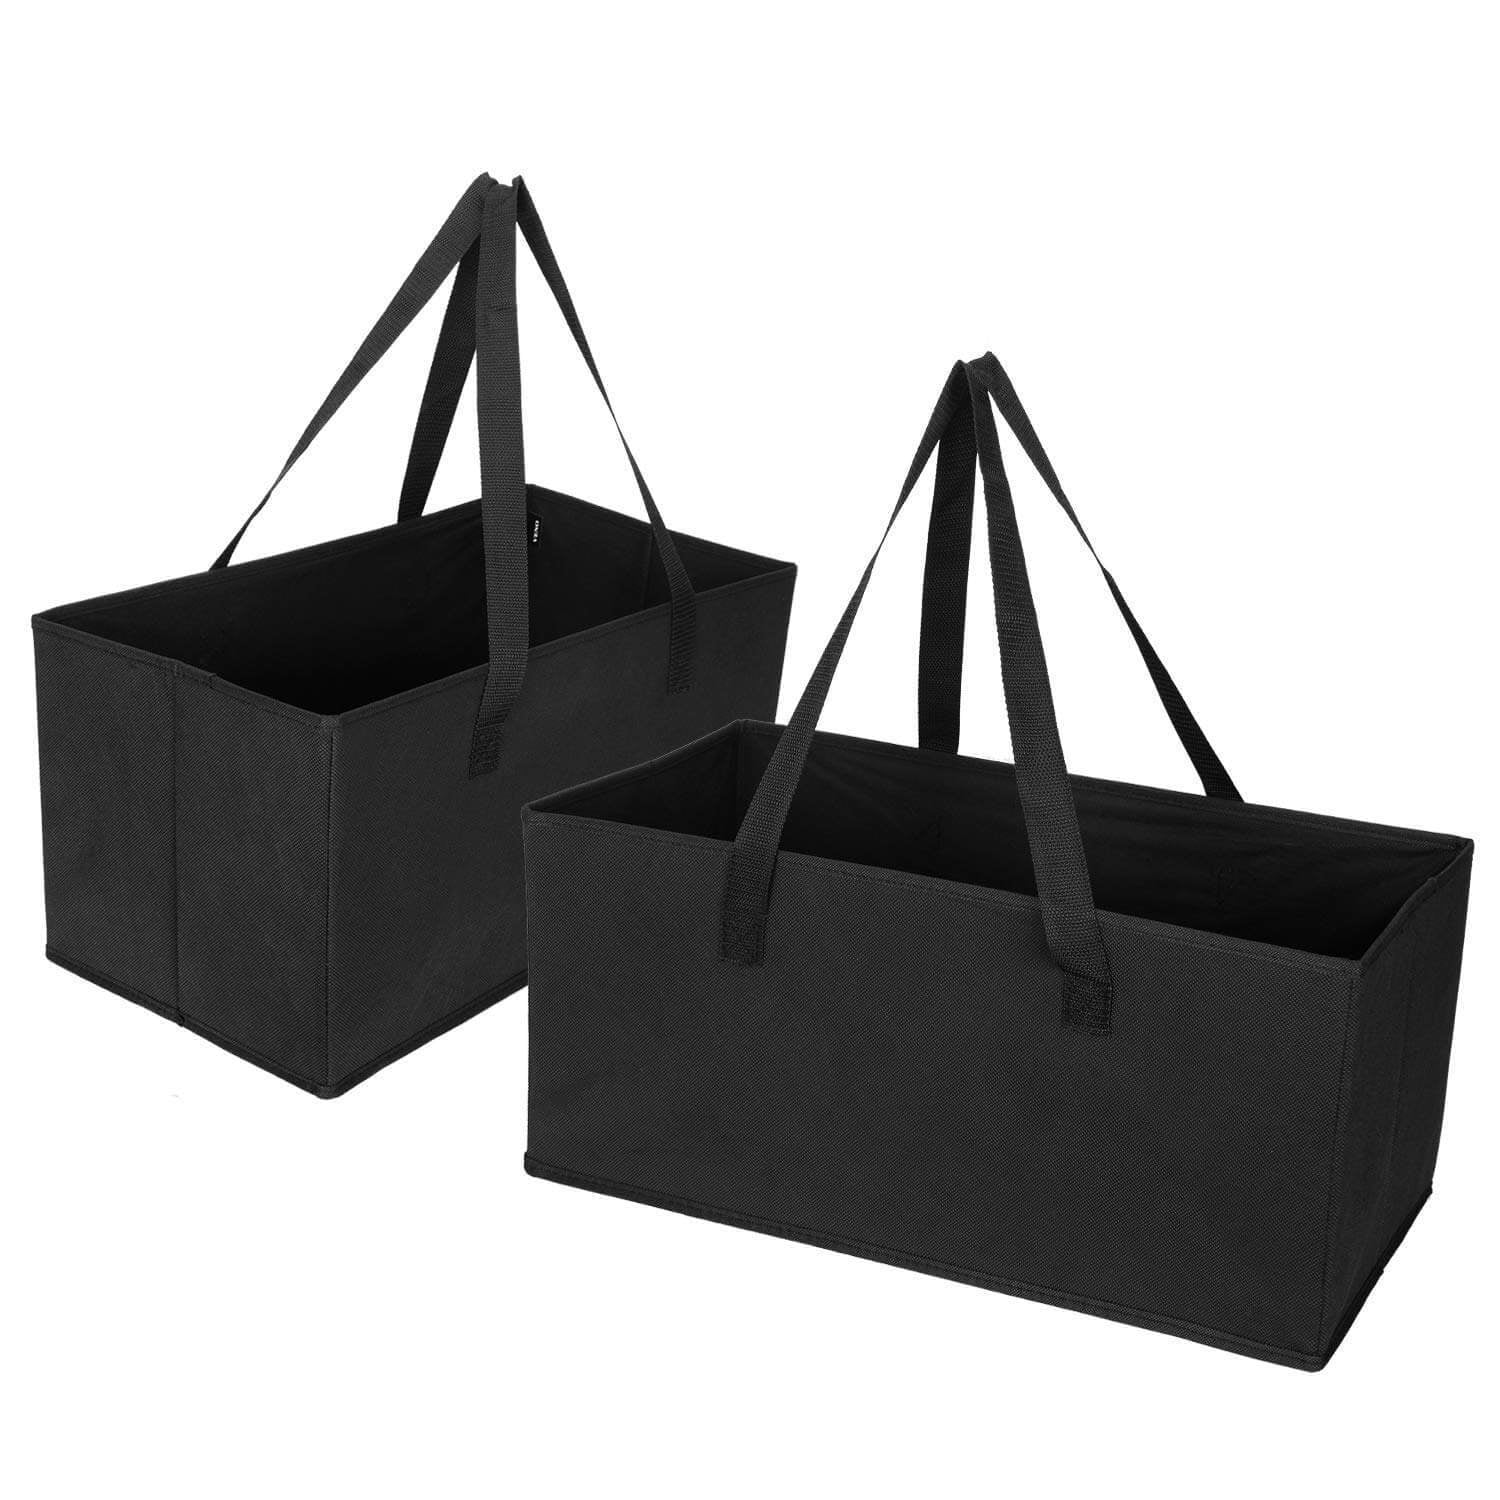 Details about   50 Pack Reusable Grocery Shopping Bags 15"x14"x6.6" Fo... Heavy Duty Washable 